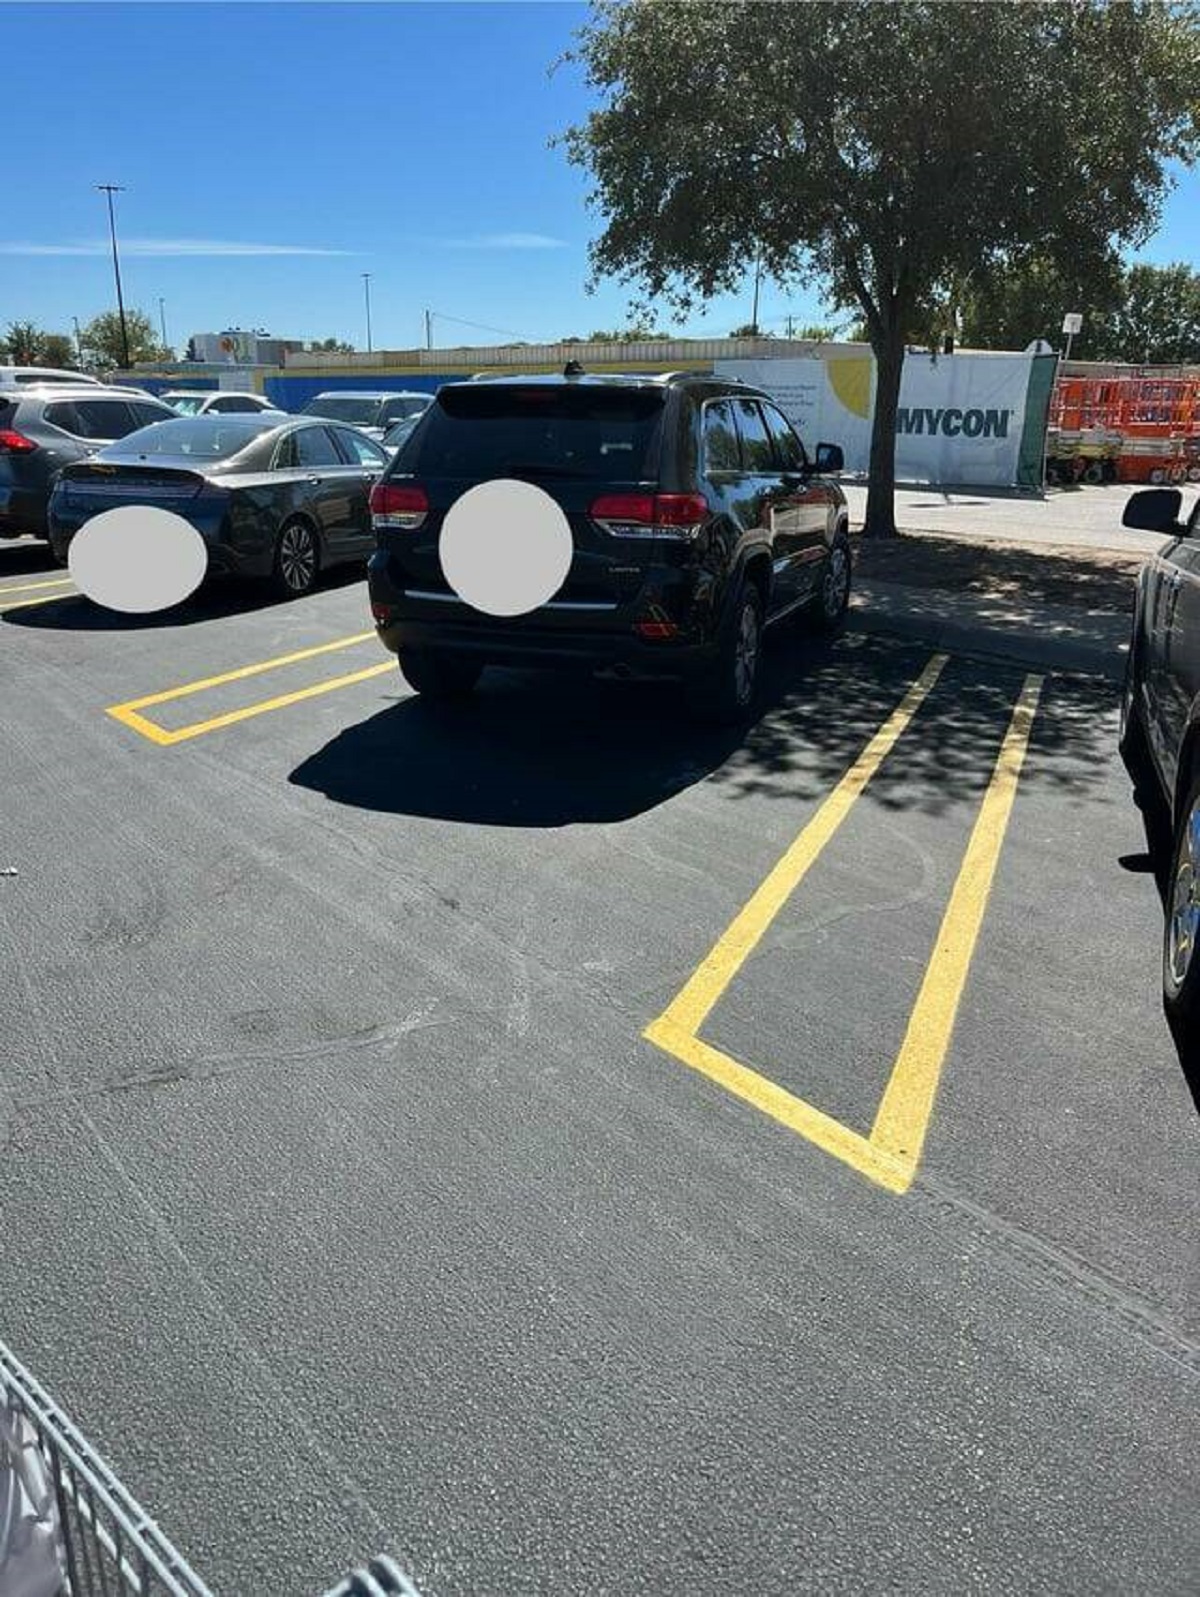 "Extra wide parking spaces at a new Walmart in Texas"